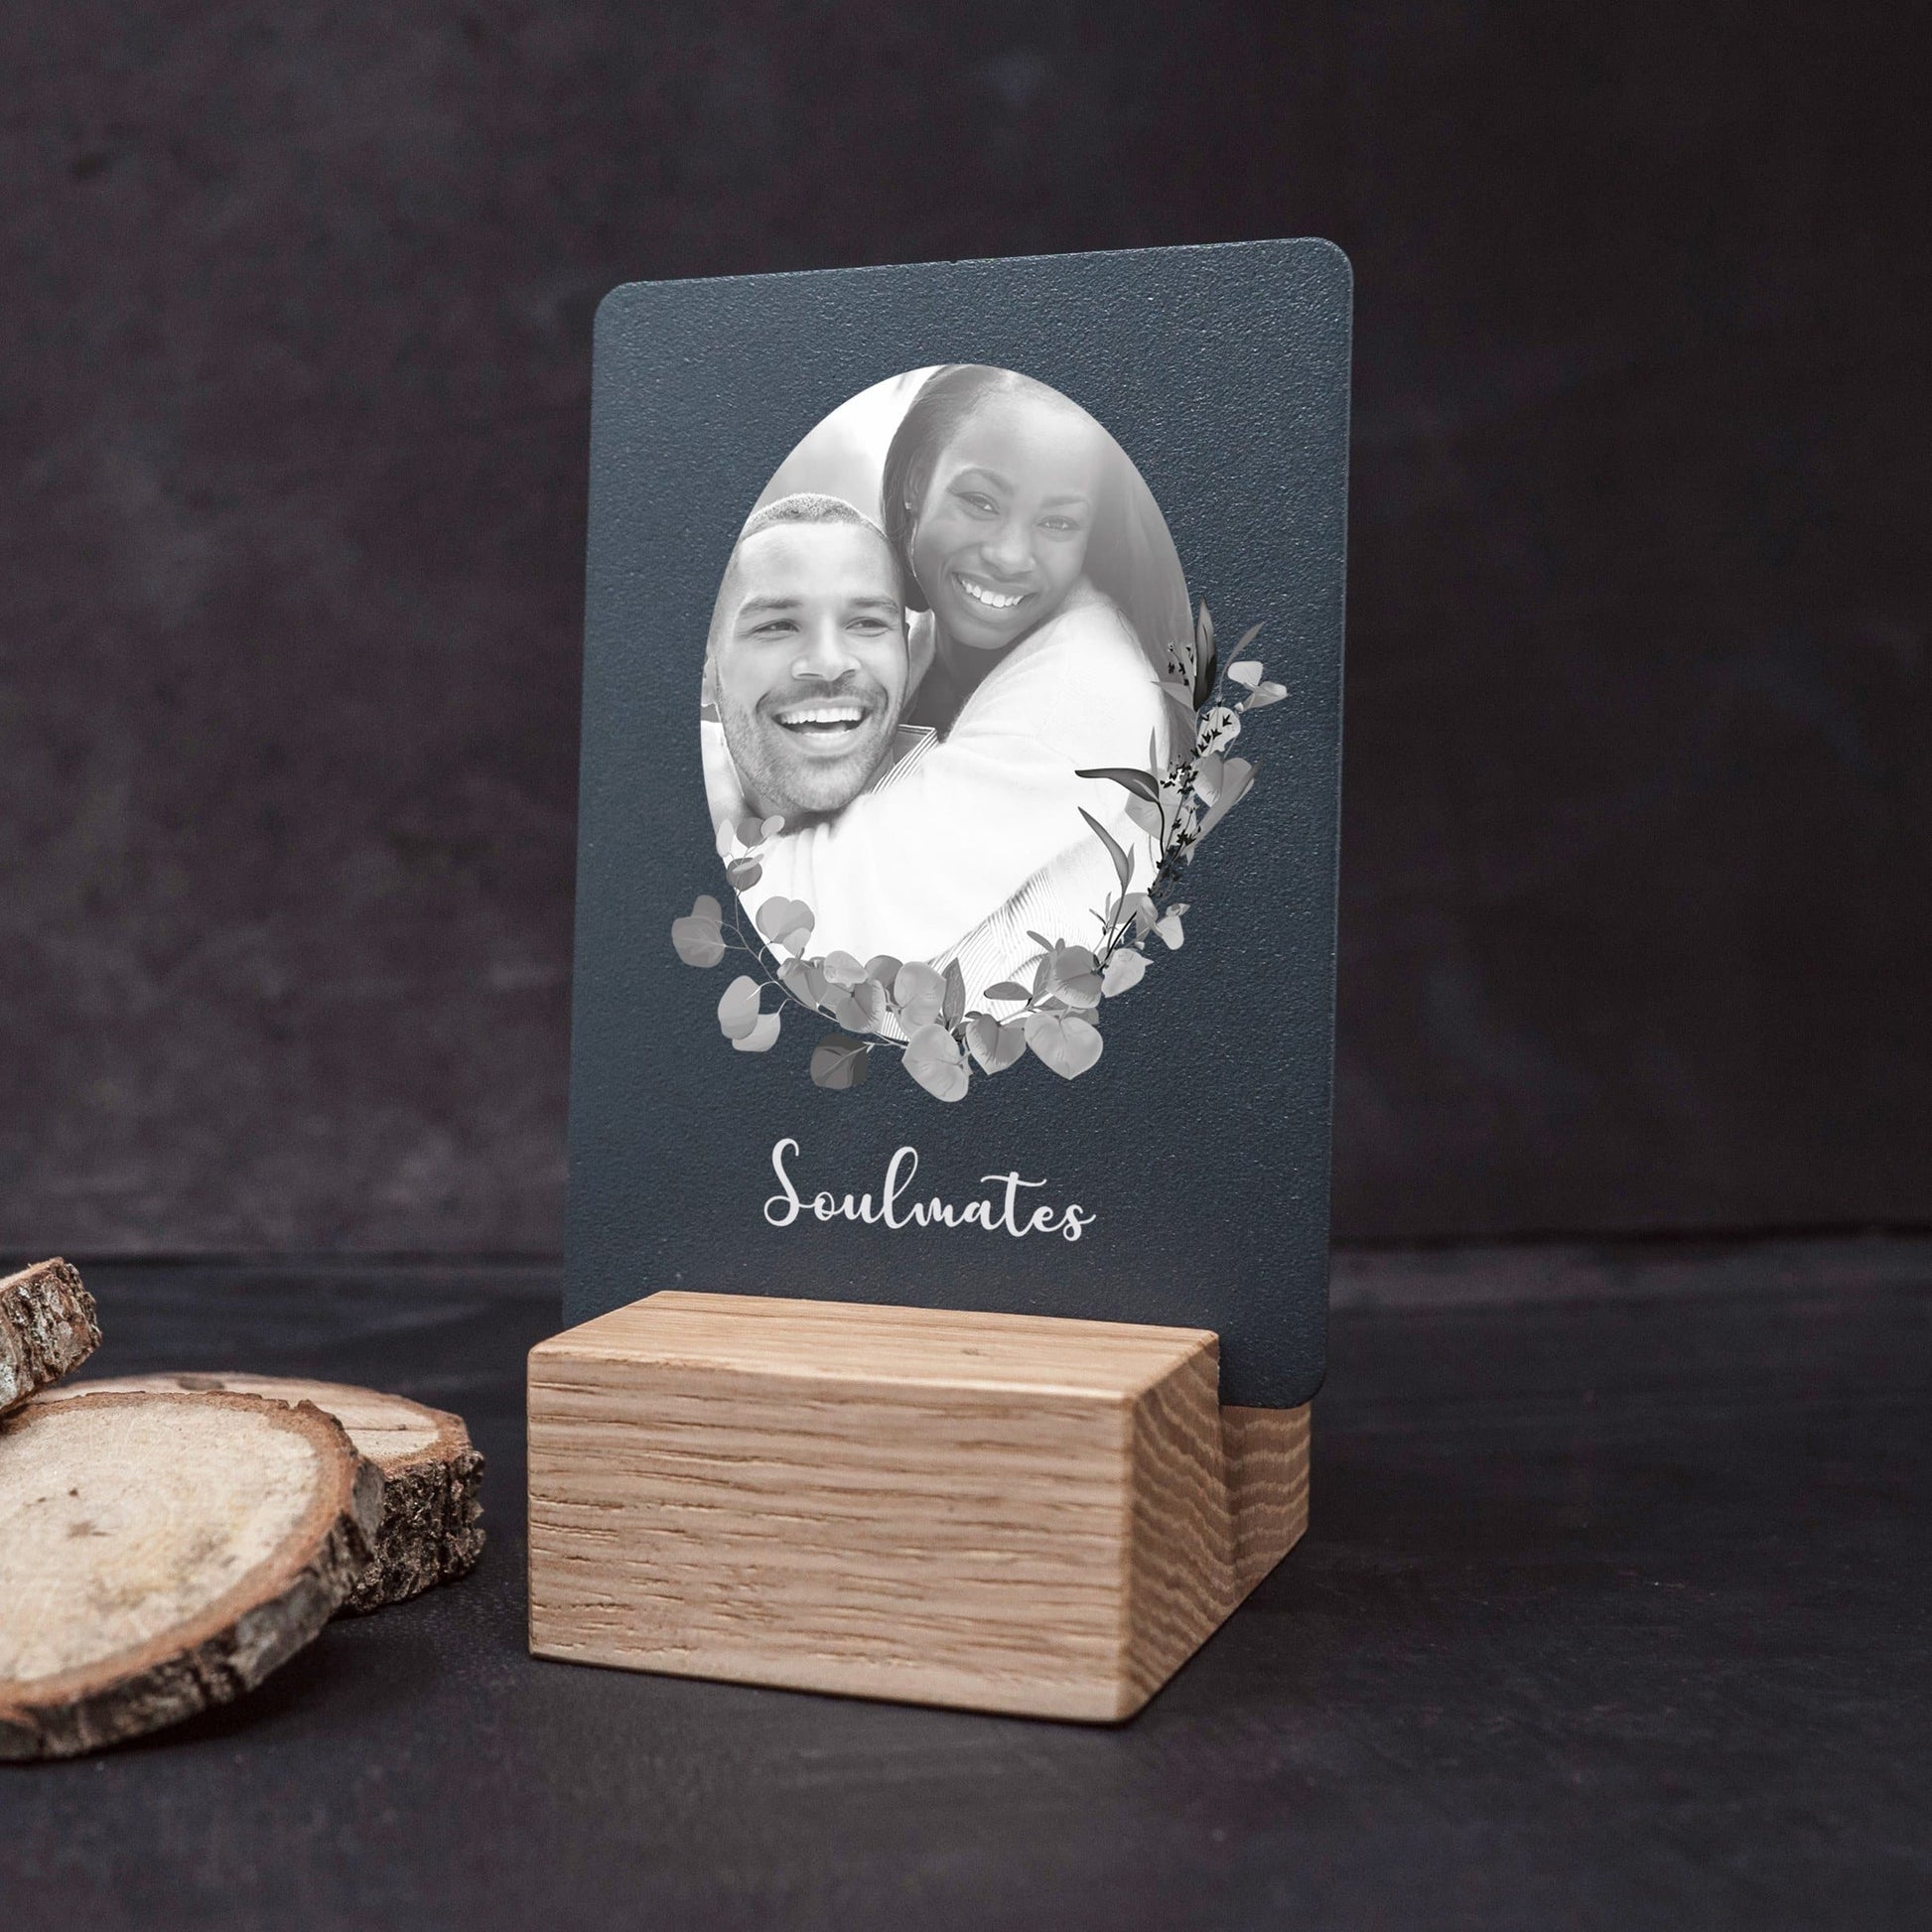 Little Message - Zweige "Soulmates" Craftbrothers 